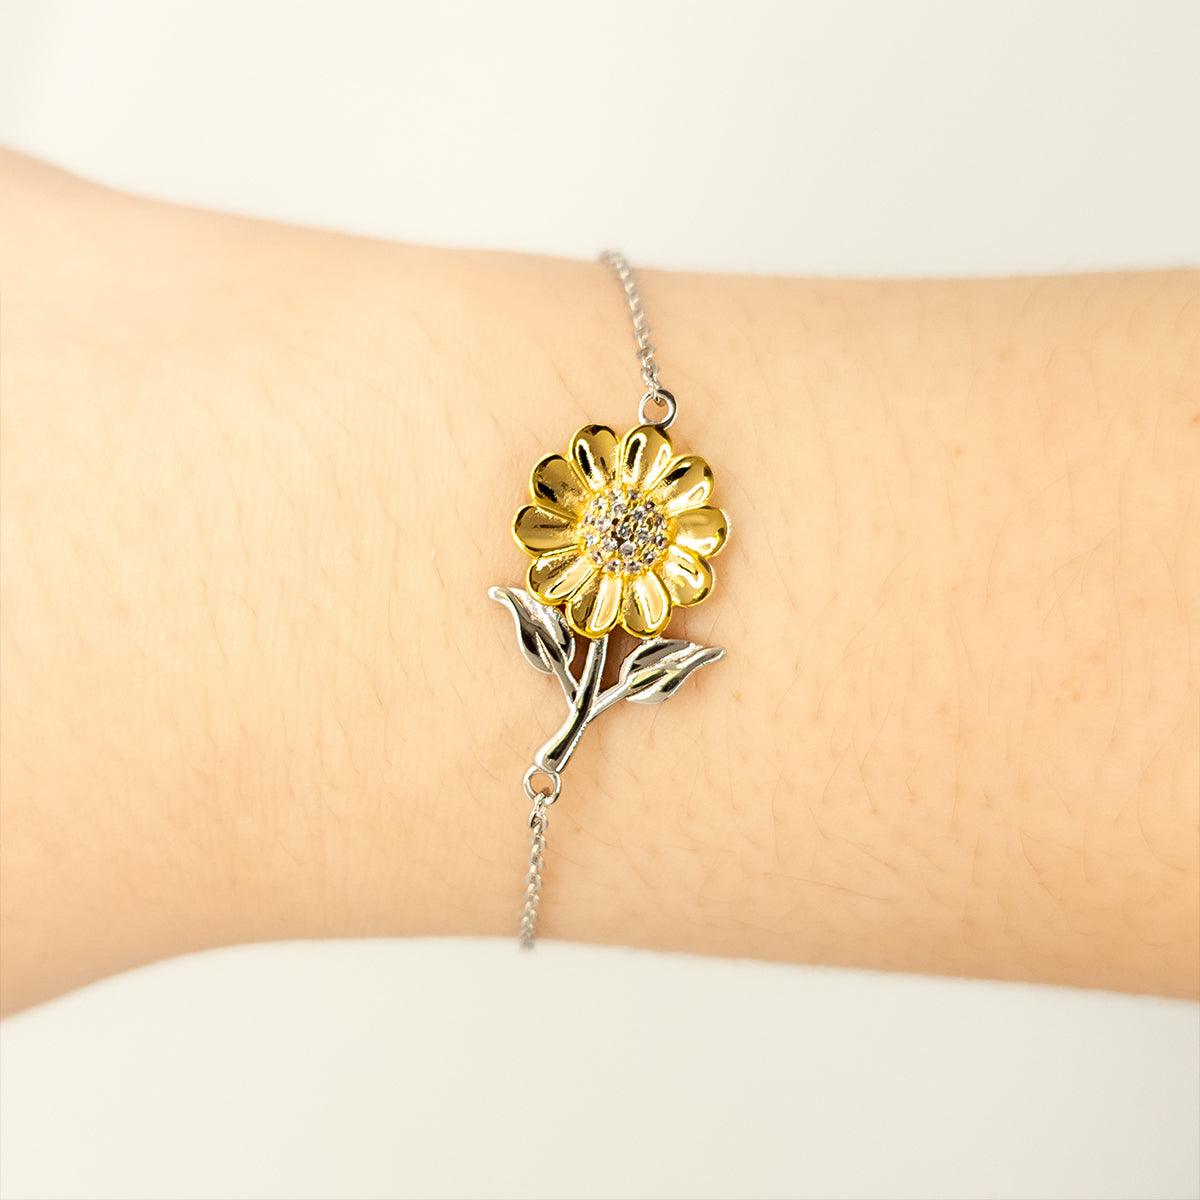 Remarkable Pilot Gifts, Your dedication and hard work, Inspirational Birthday Christmas Unique Sunflower Bracelet For Pilot, Coworkers, Men, Women, Friends - Mallard Moon Gift Shop